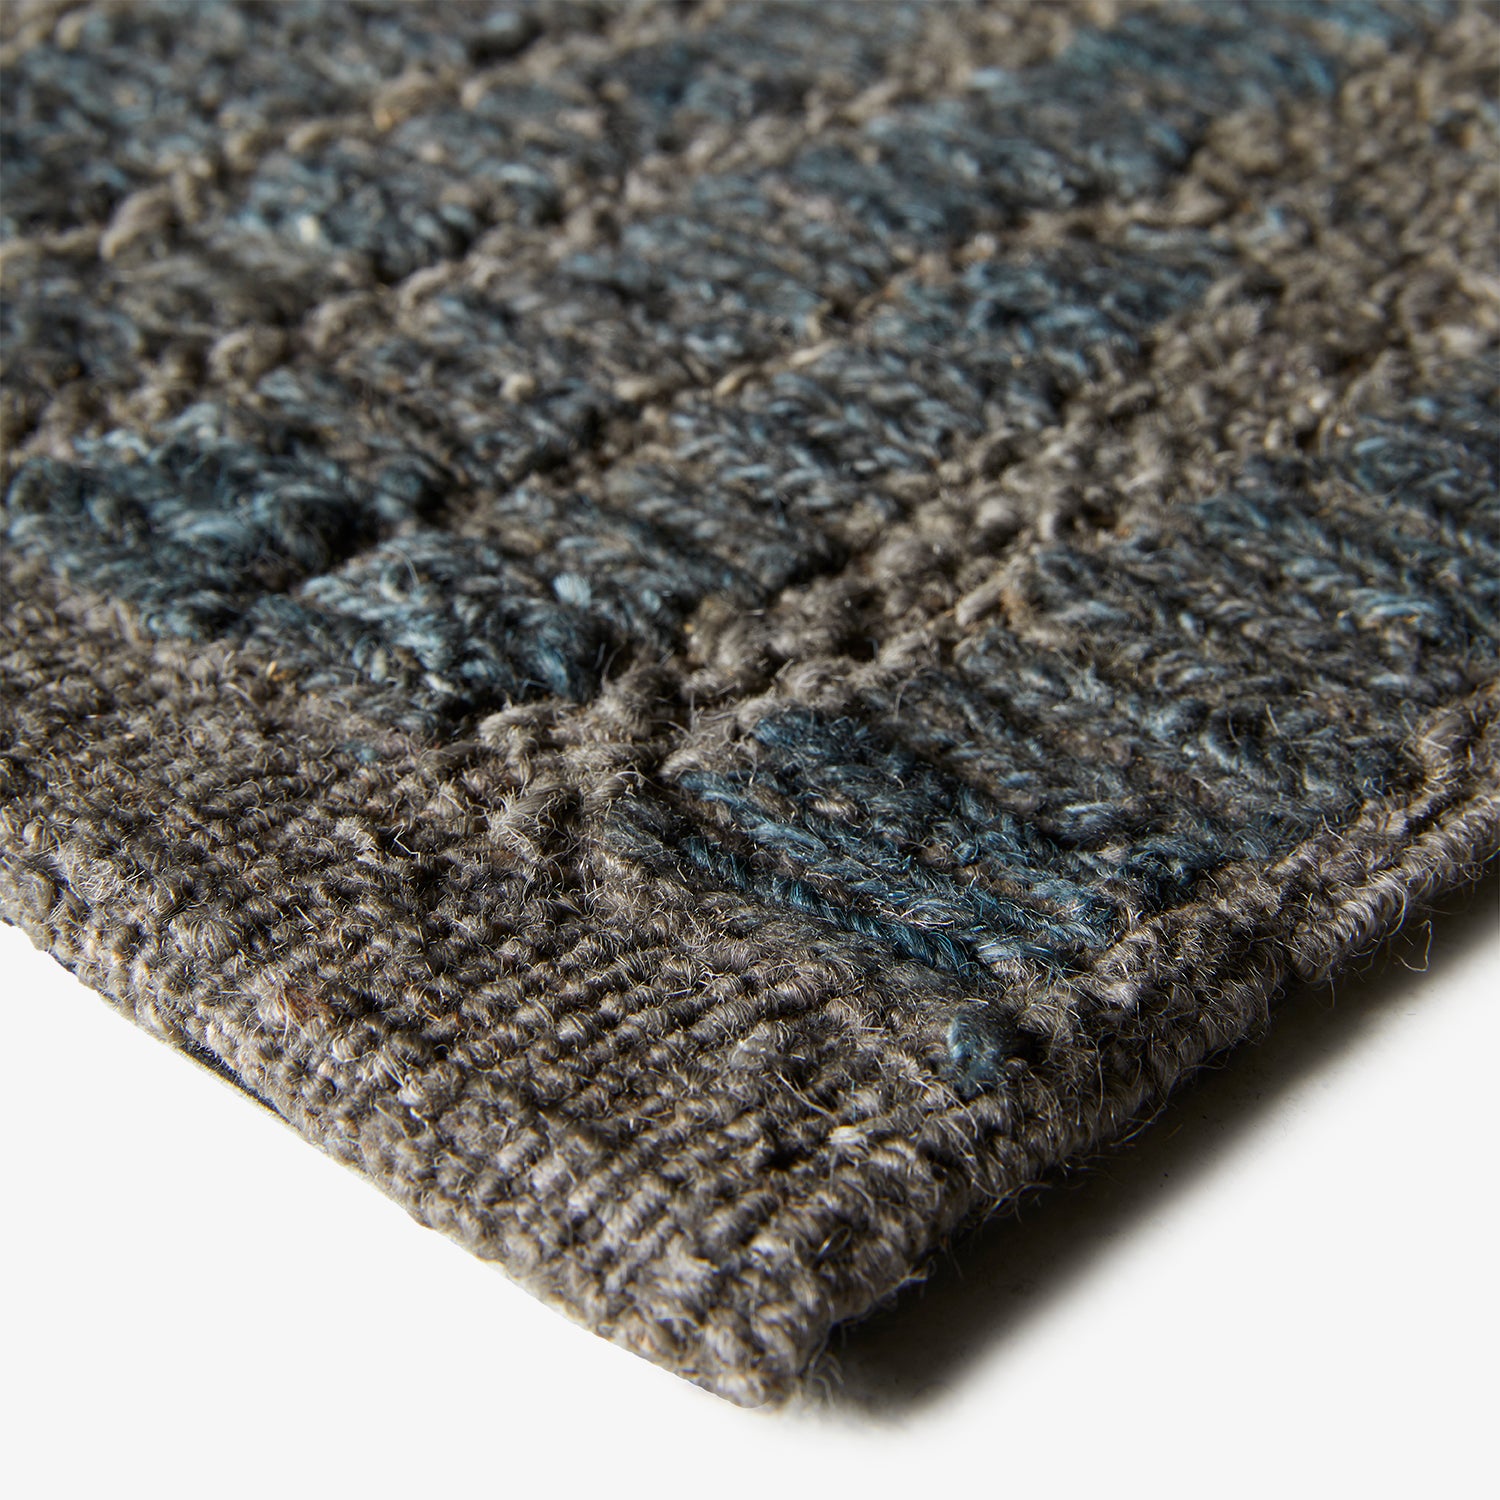 Close-up of a dense, looped fabric in shades of gray.